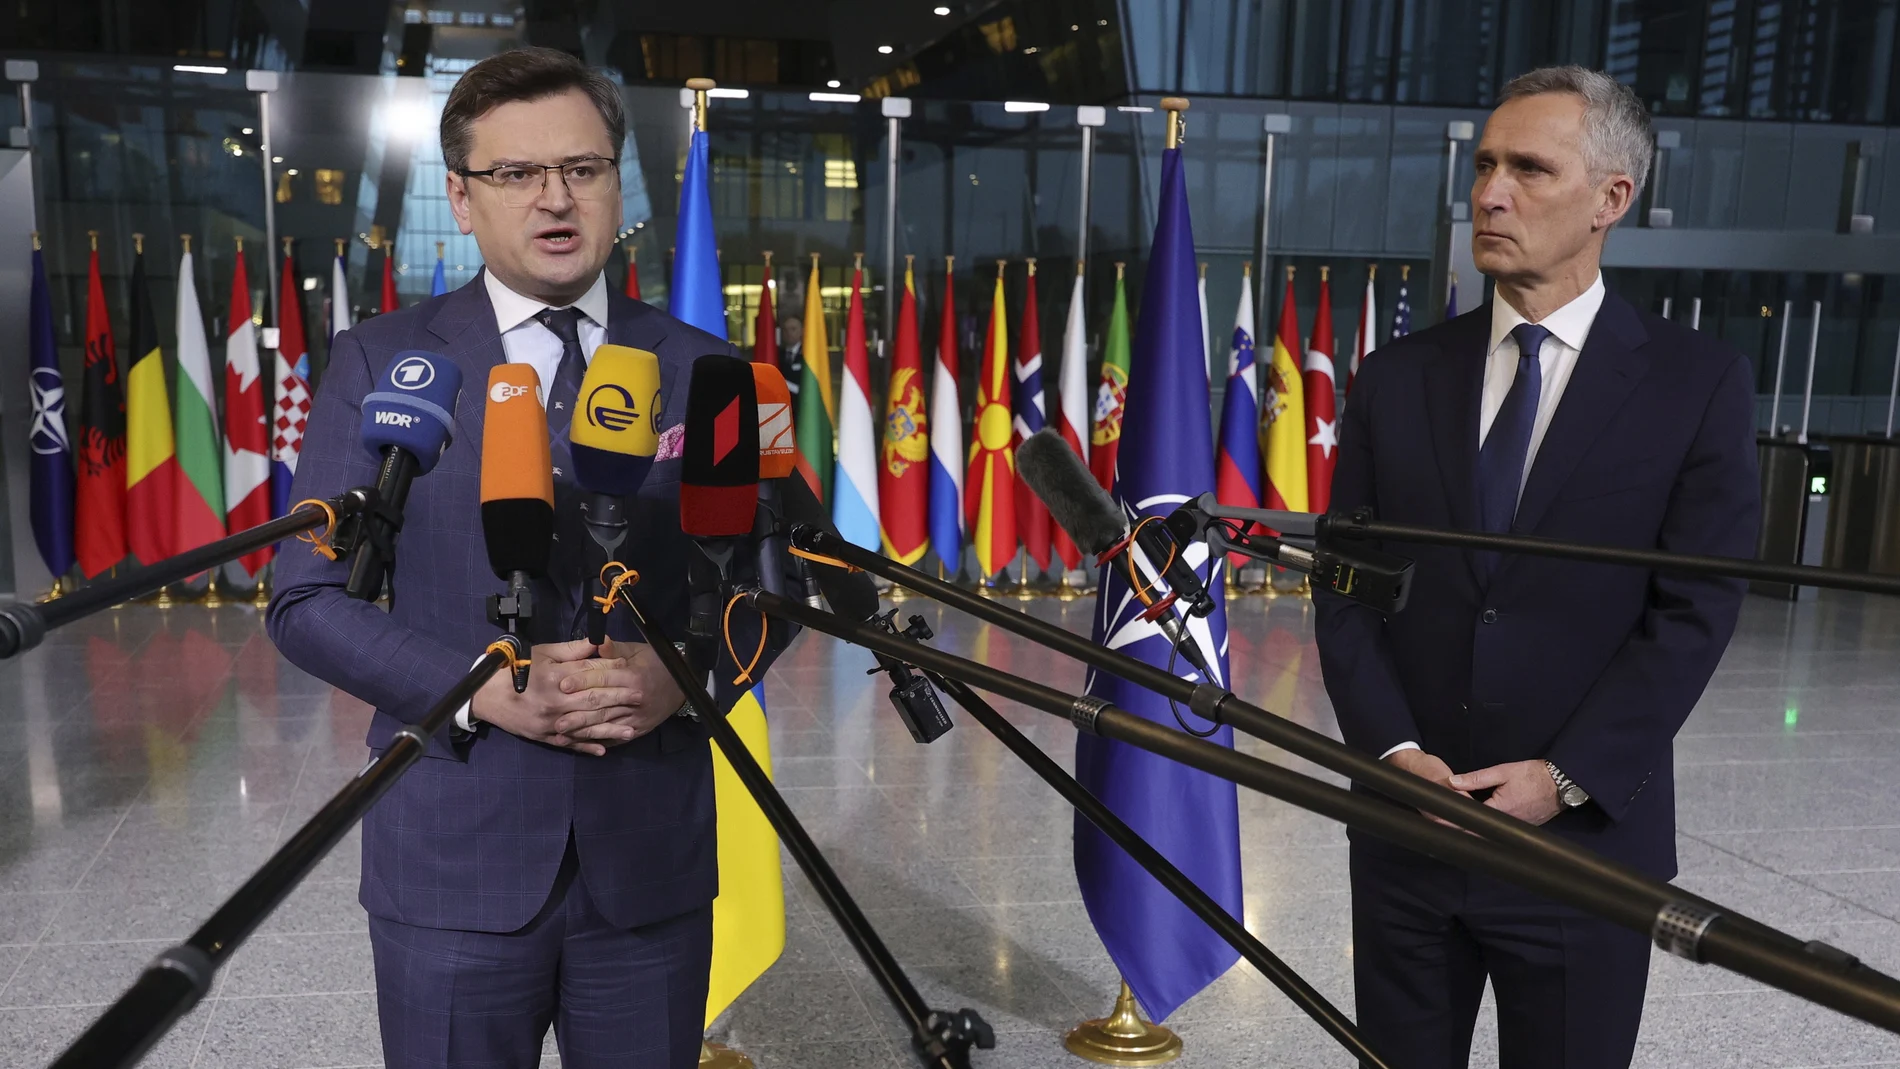 Ukraine's Foreign Minister Dmytro Kuleba, left, and NATO Secretary General Jens Stoltenberg speak with the media as they arrive for a meeting of NATO foreign ministers at NATO headquarters in Brussels, Thursday, April 7, 2022. NATO foreign ministers are meeting to discuss how to bolster their support to Ukraine, including by supplying weapons to the conflict-torn country, without being drawn into a wider war with Russia. (AP Photo/Olivier Matthys)